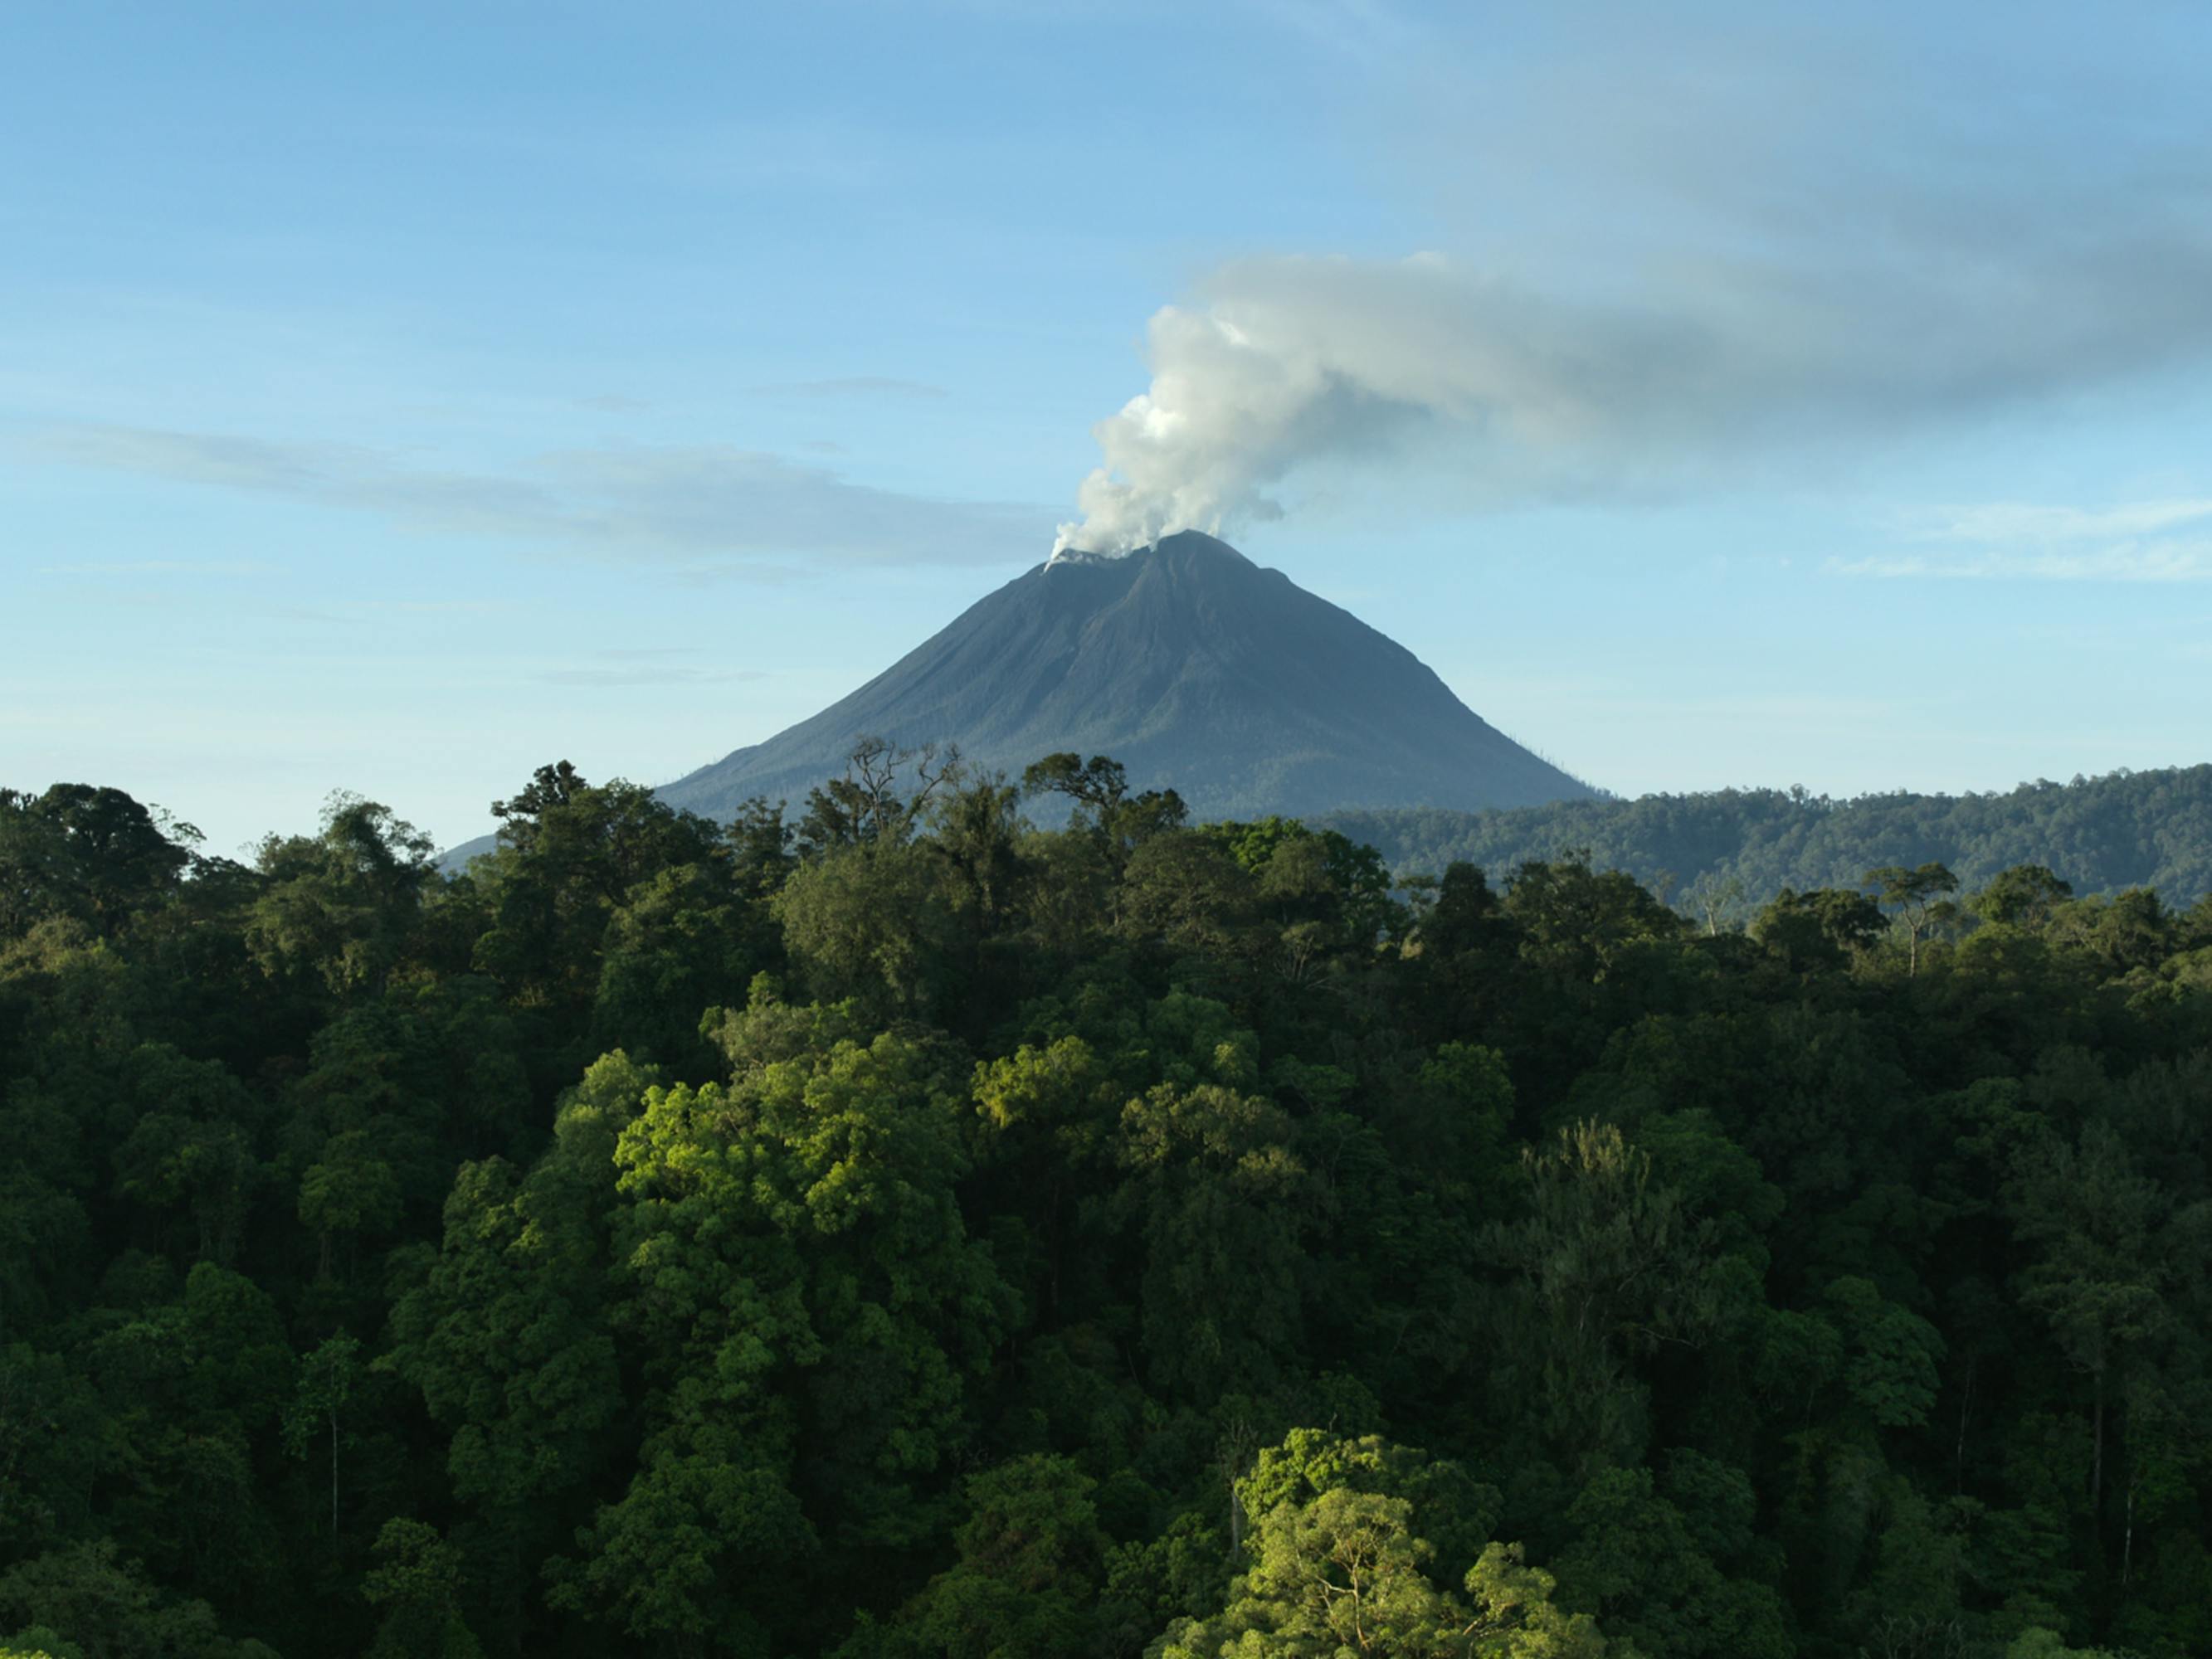 A volcano in this distance omits some light grey smoke. The scene is surrounded by lush green trees.